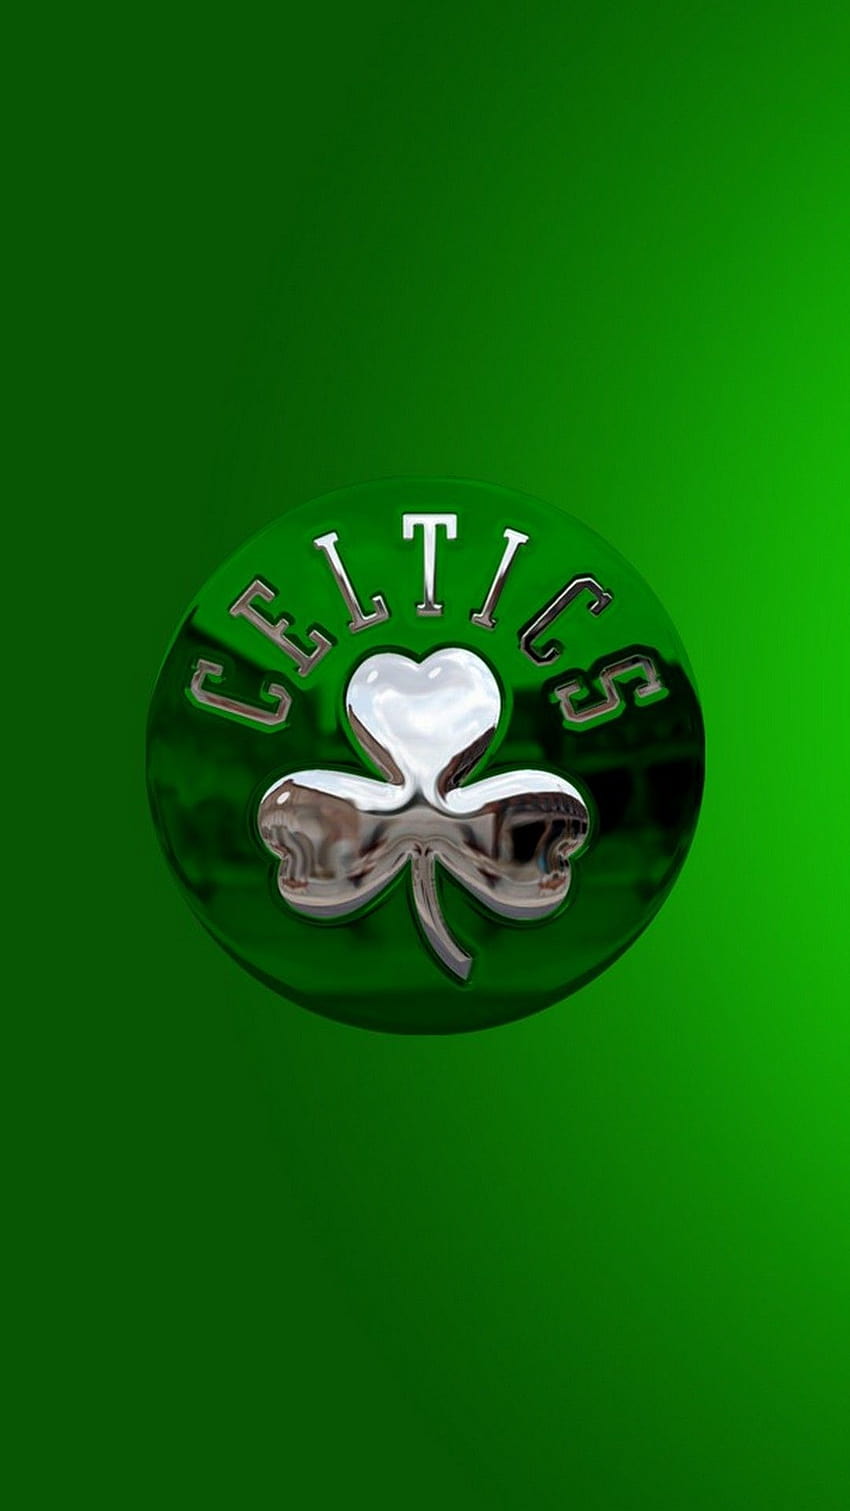 Boston Celtics For Android 2020 Android [1080x1920] for your , Mobile & Tablet, boston celtics iphone 11 HD phone wallpaper